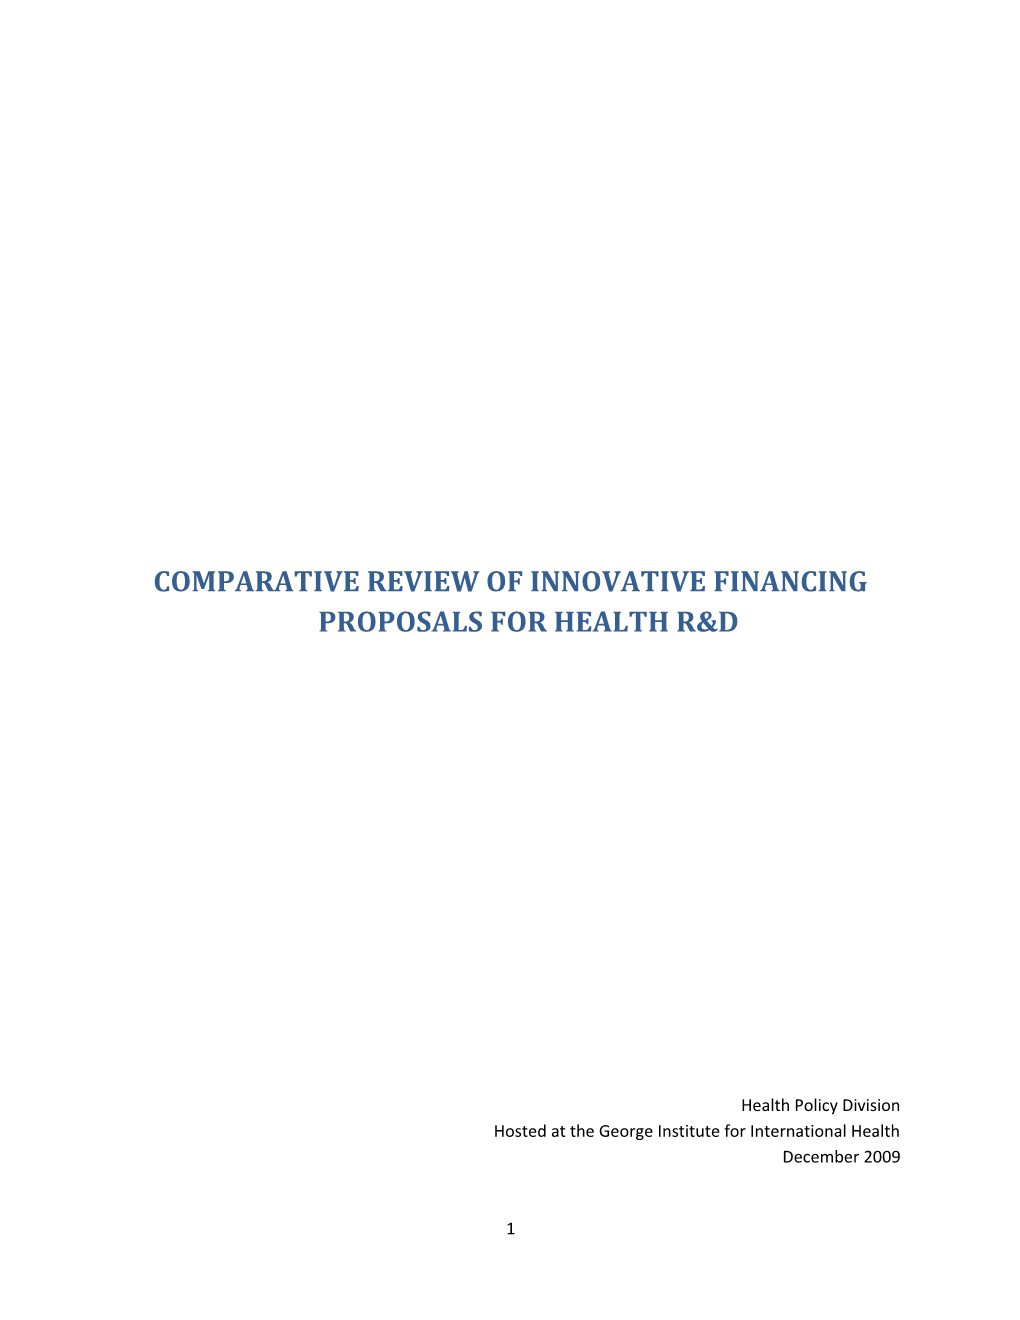 Comparative Review of Innovative Financing Proposals for Health R&D